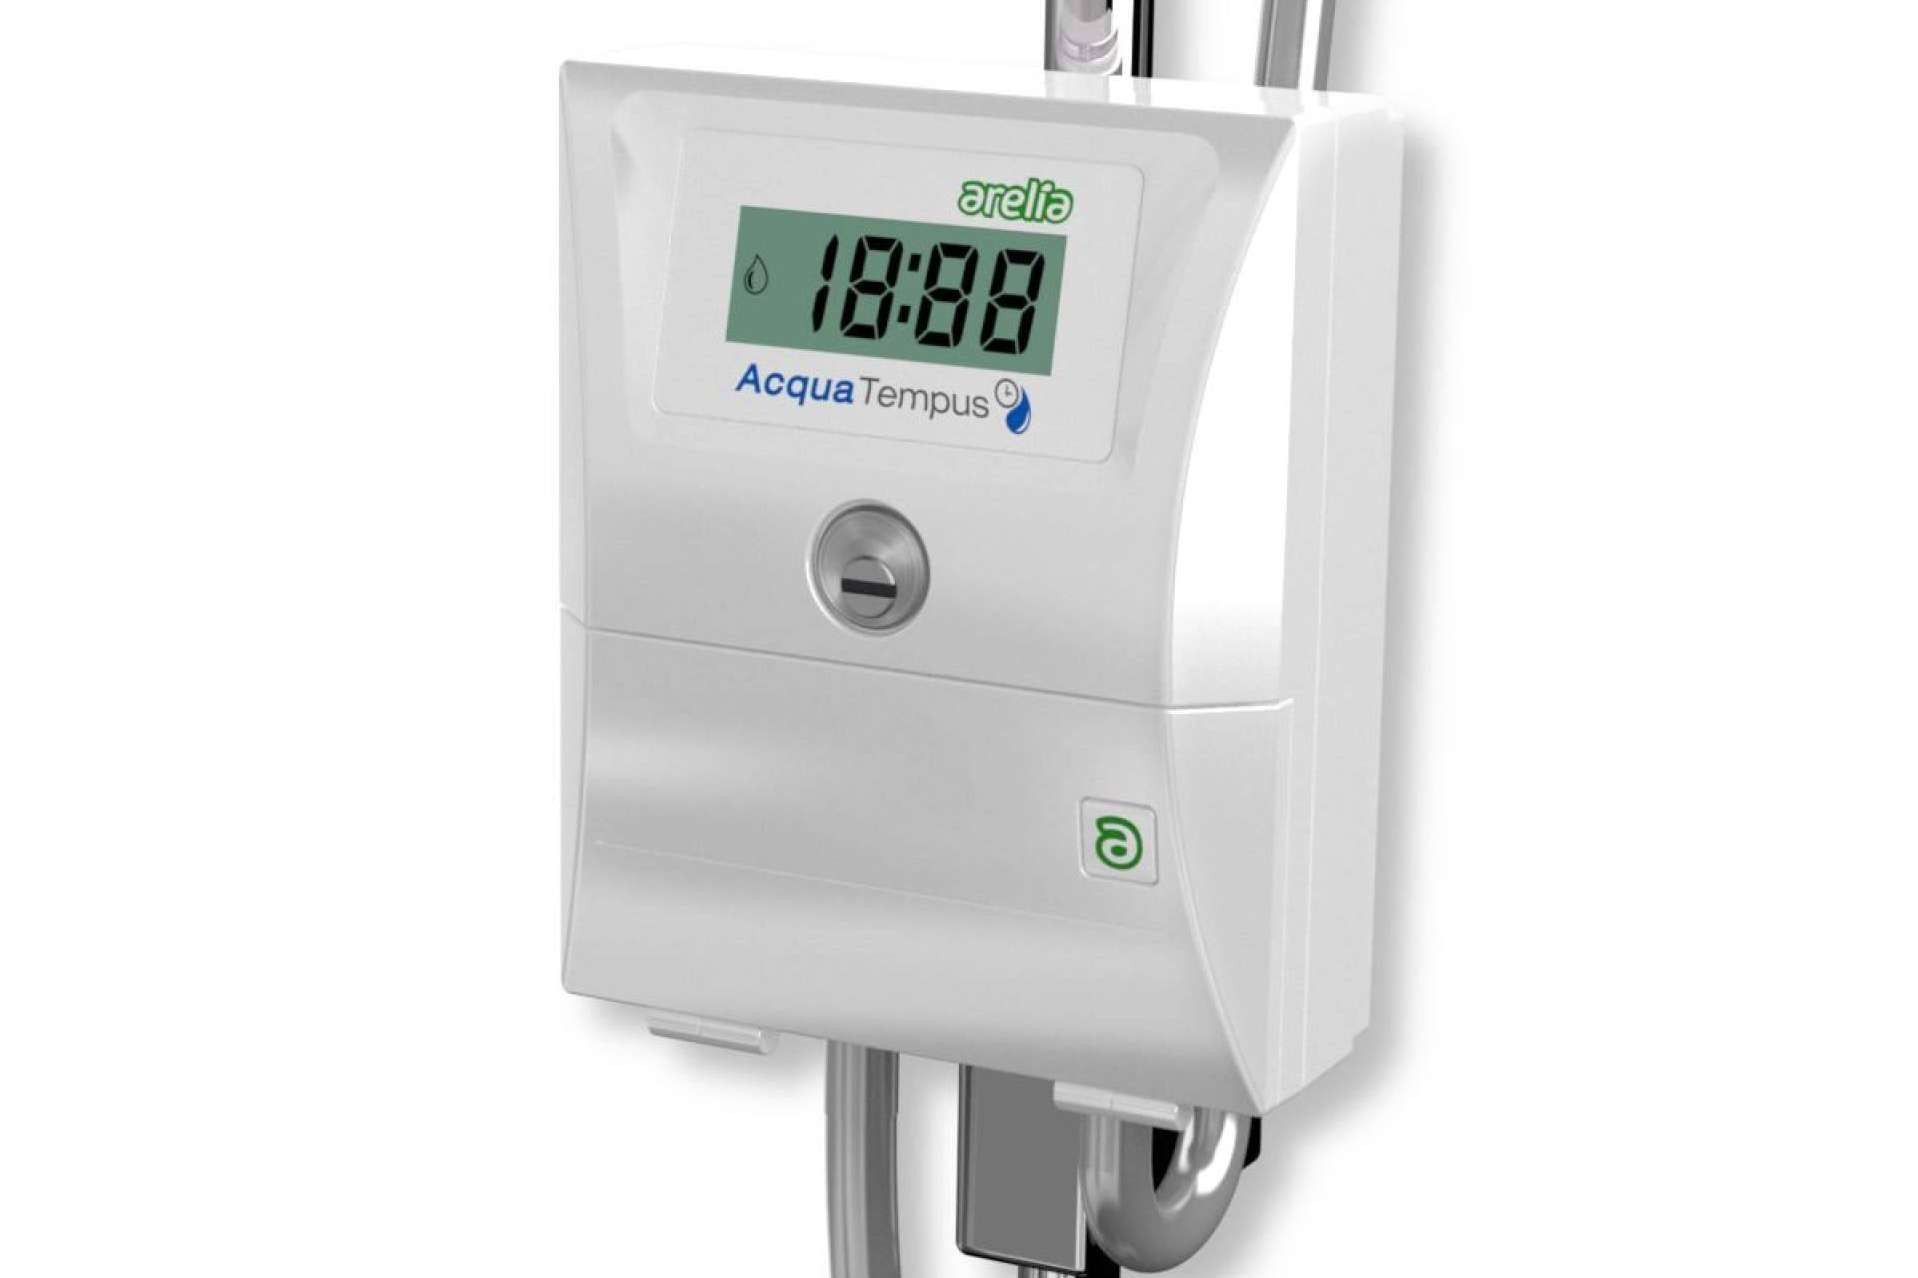  Acqua Tempus; the new shower timer for saving water and gas 